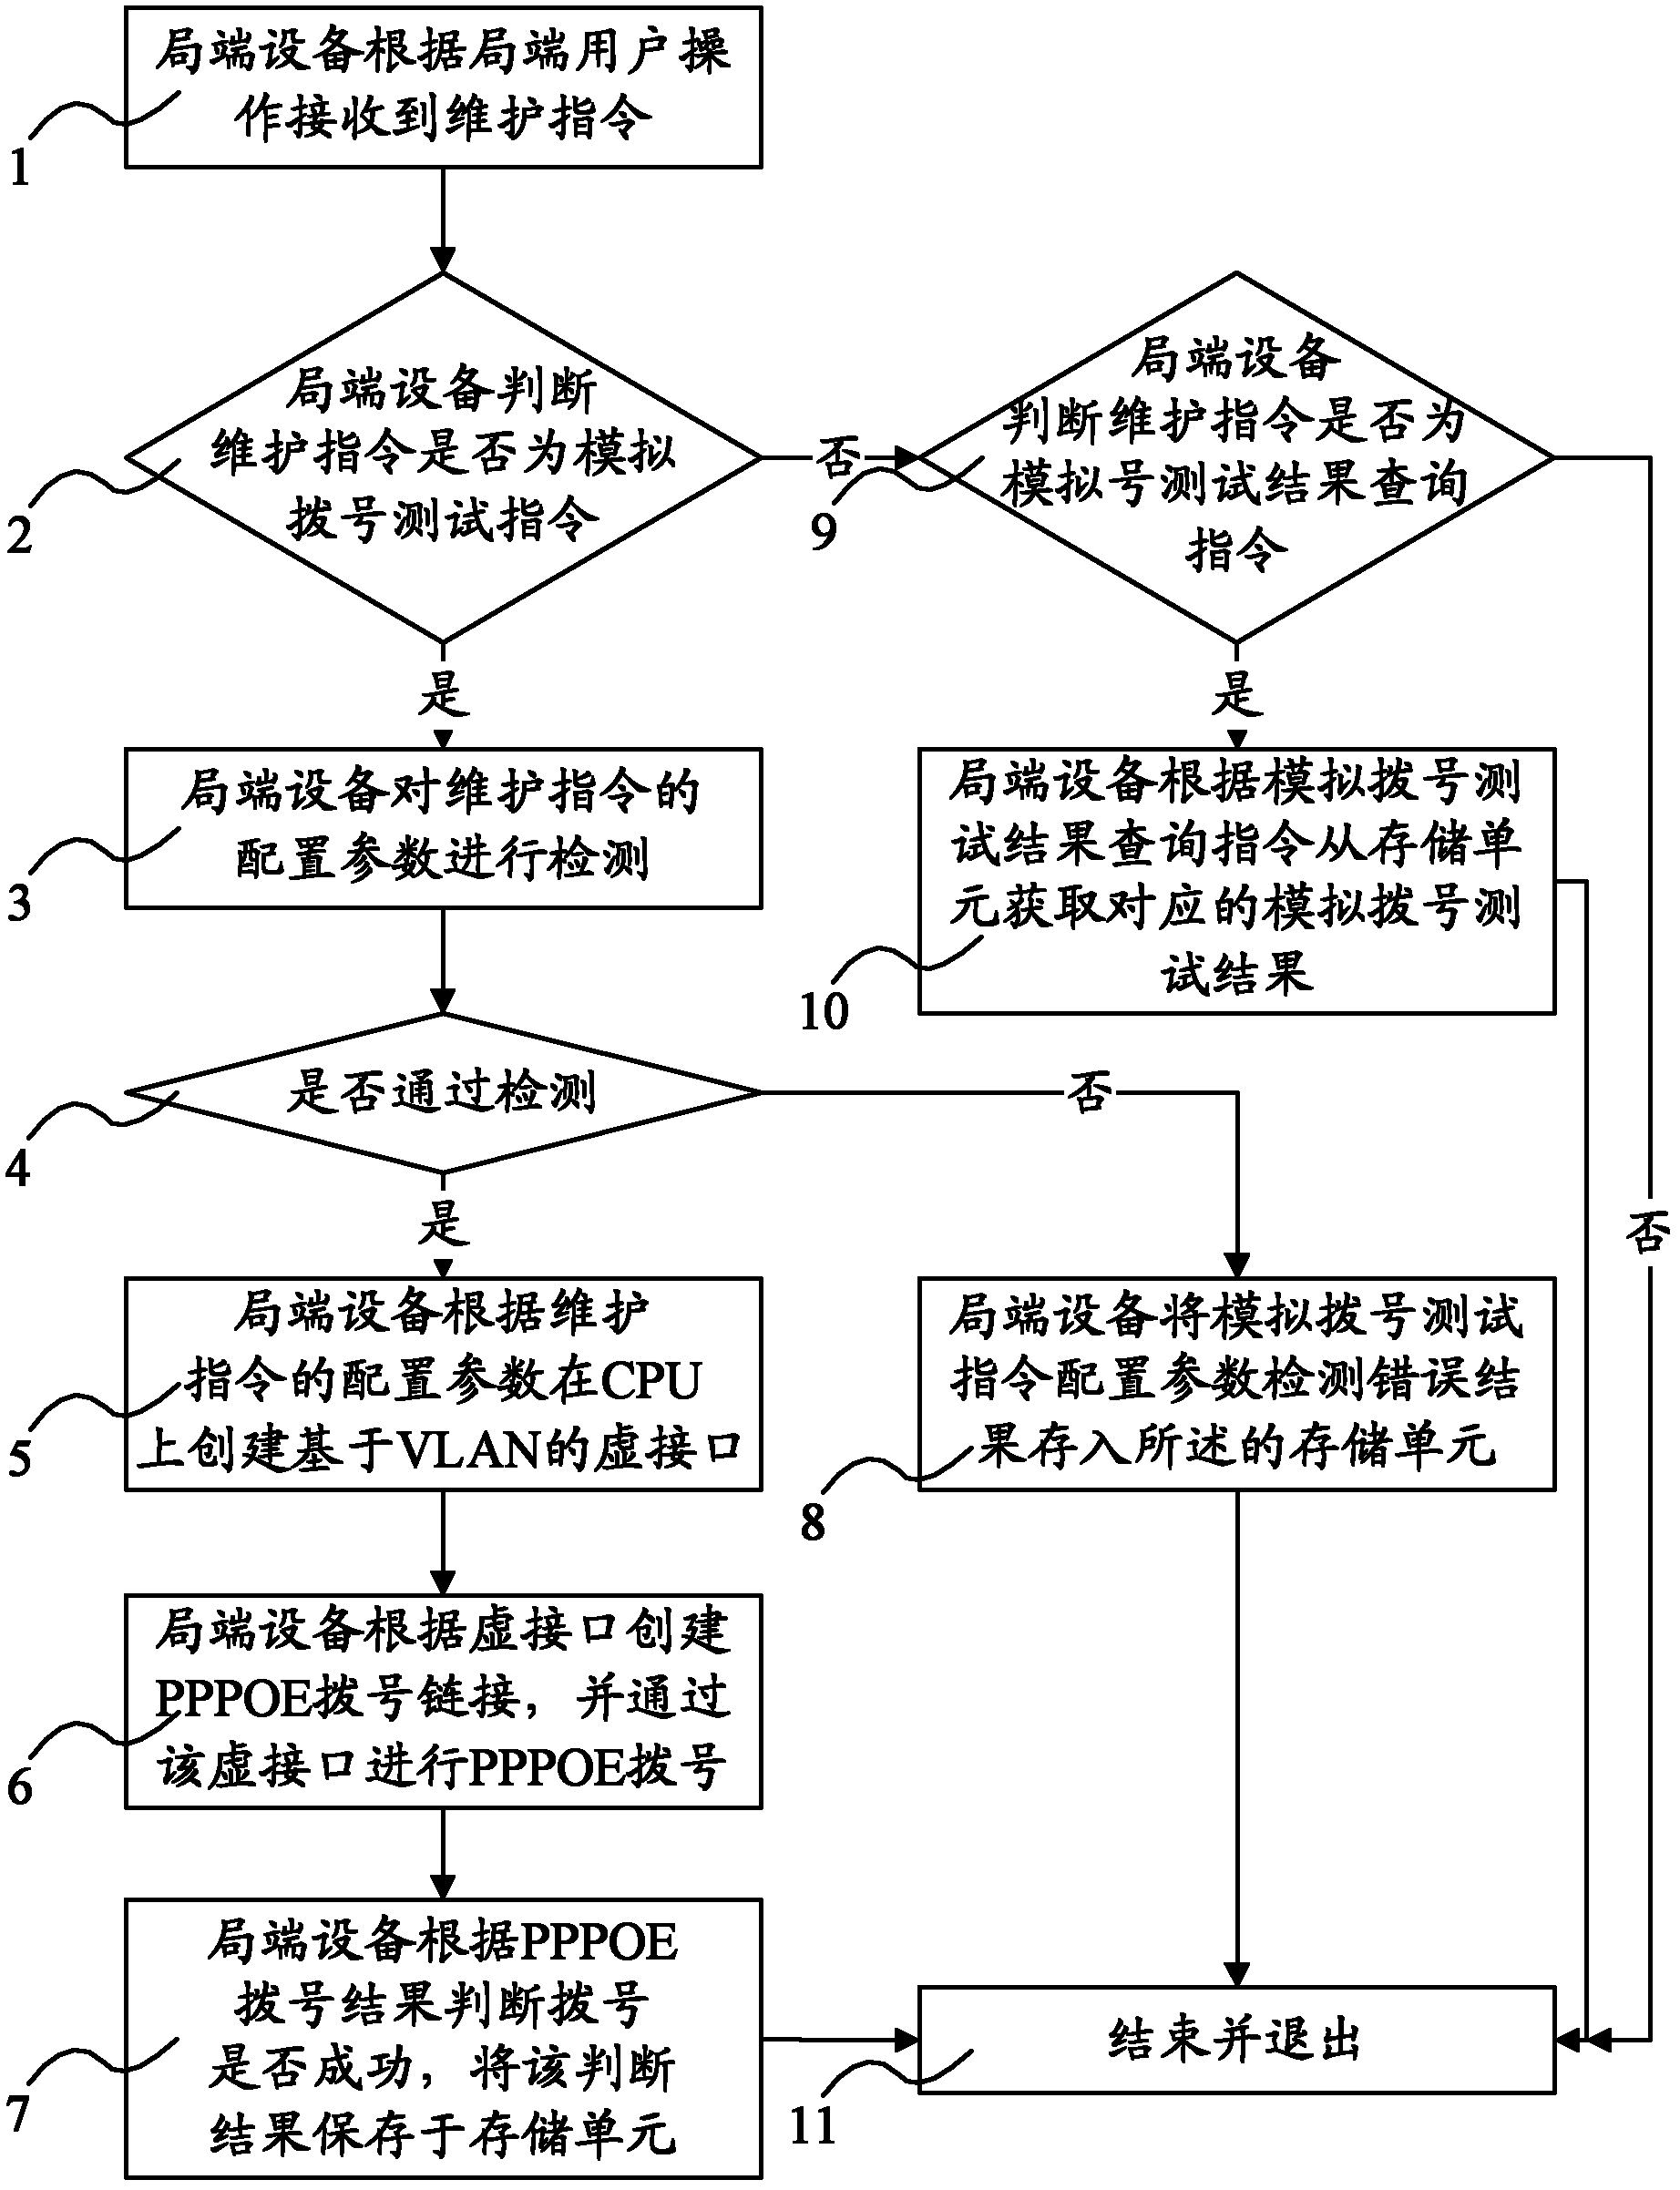 Method for implementing network connection test between local-side device and terminal device in EPON (Ethernet passive optical network)